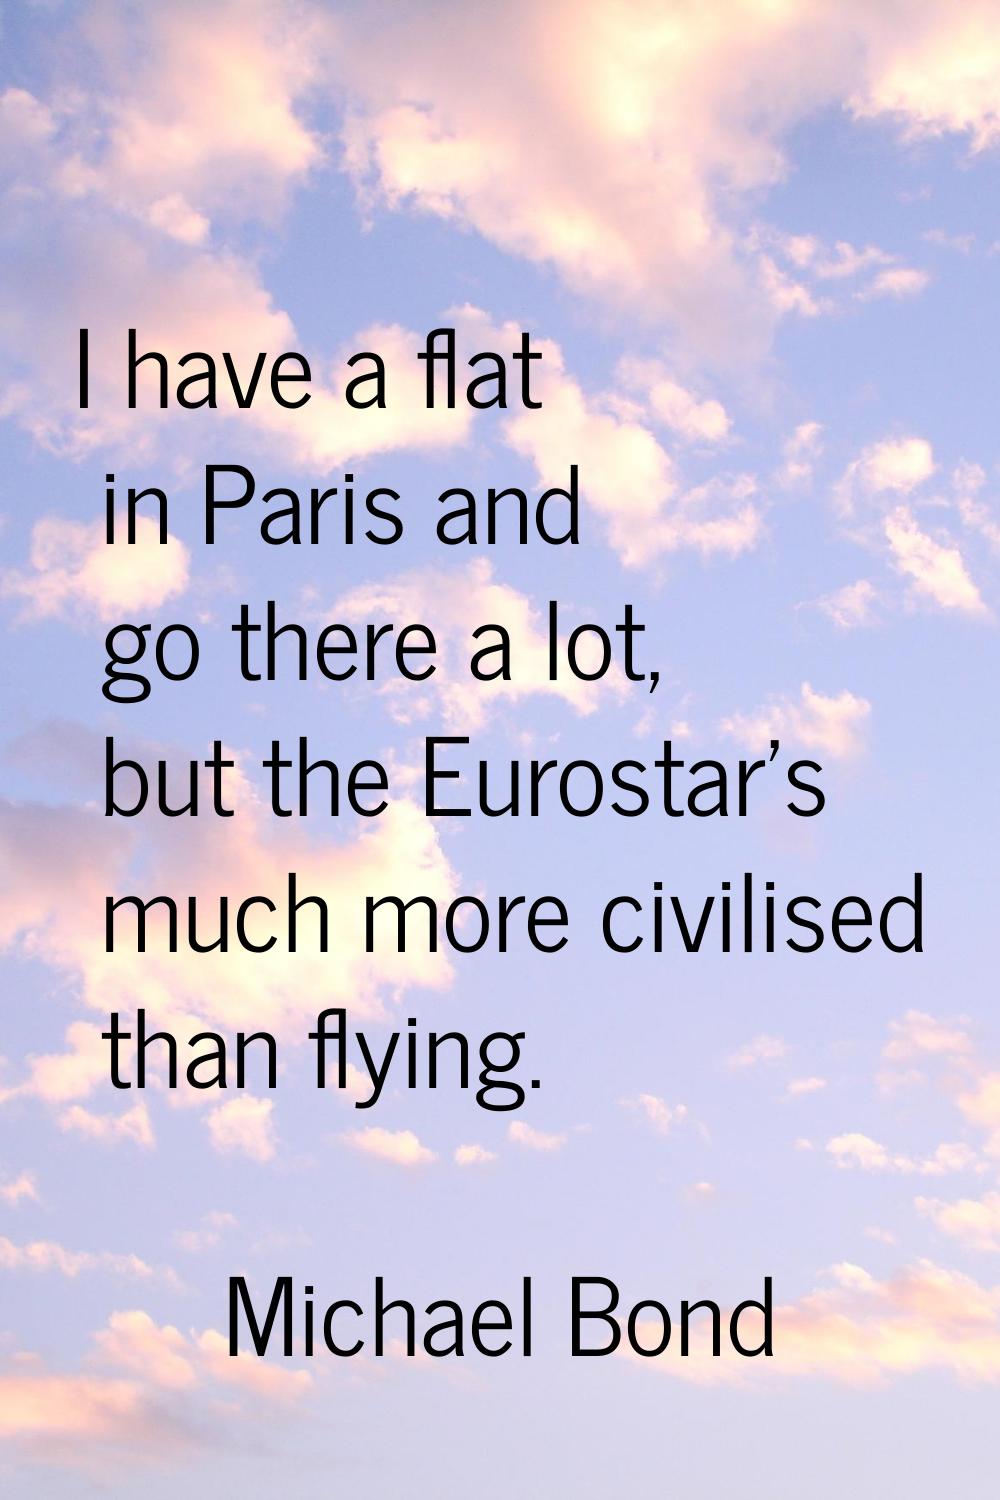 I have a flat in Paris and go there a lot, but the Eurostar's much more civilised than flying.